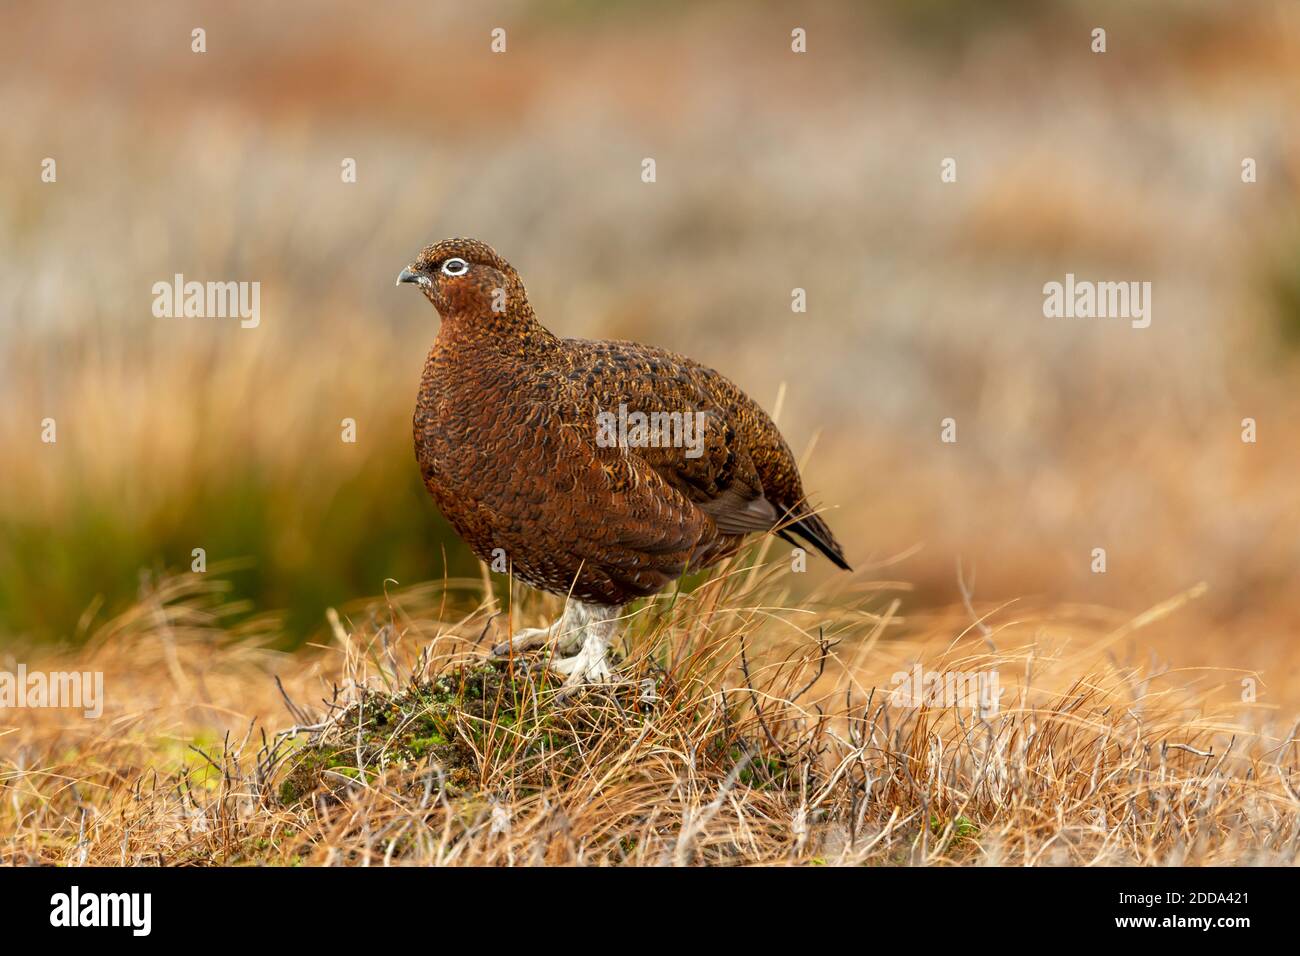 Red Grouse (Scientific name: Lagopus Lagopus)Close up of a male Red Grouse with white feathery legs in Autumn. Facing left in natural moorland habitat Stock Photo